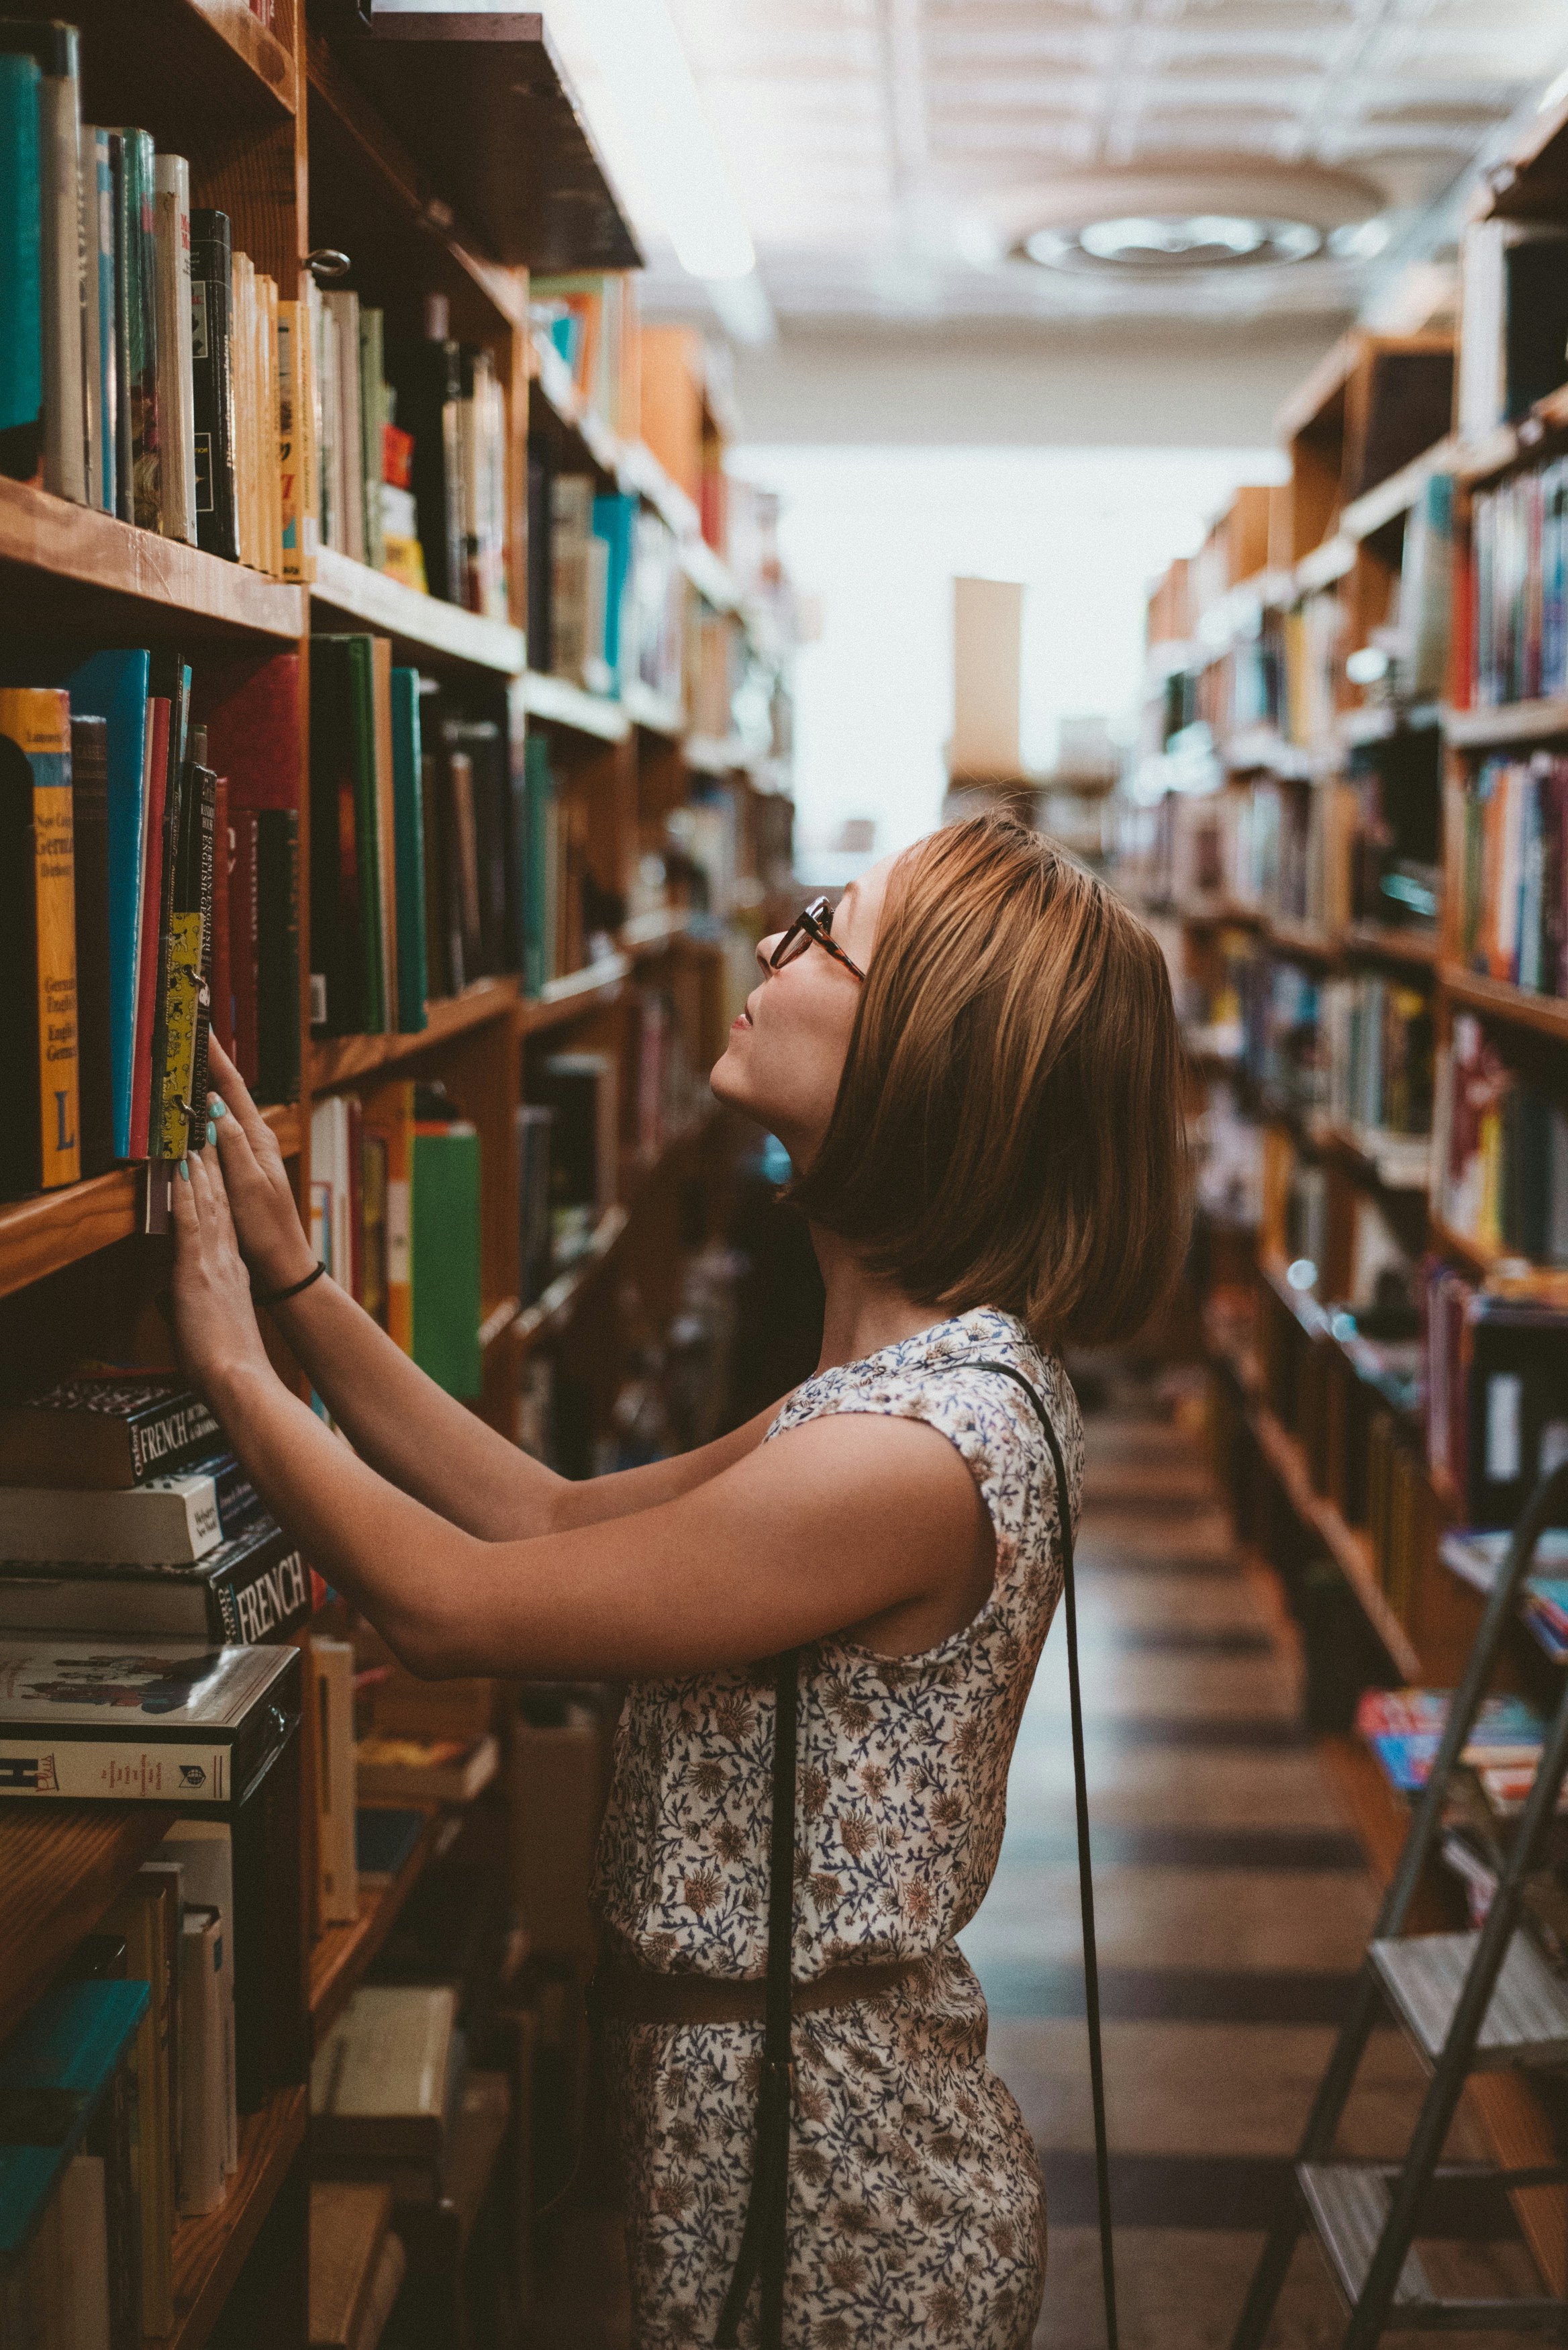 A woman reaching for a book in a library | Source: Unsplash